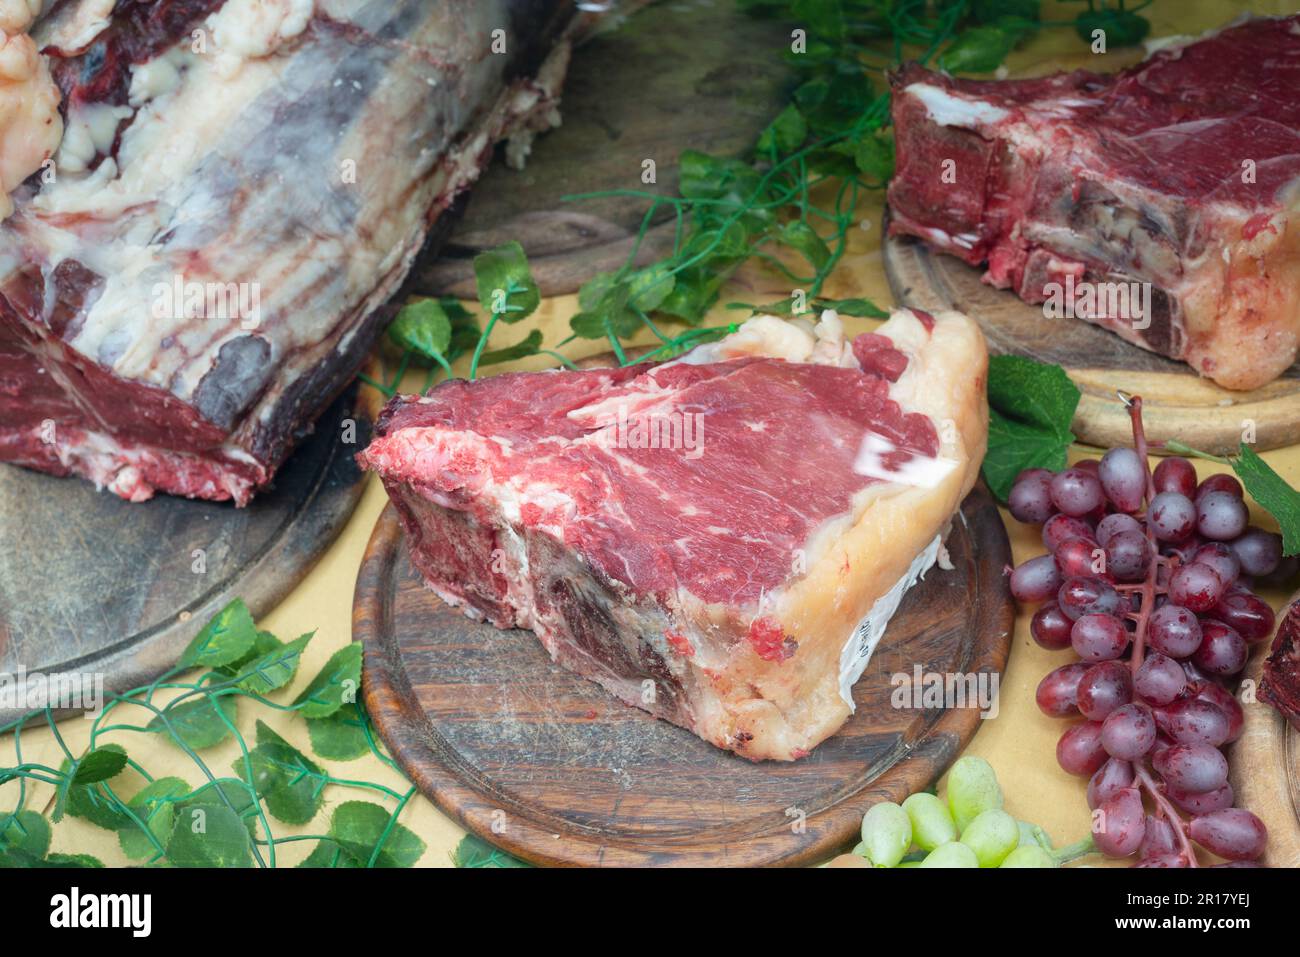 Italy, Street Food Festival, Typical Tuscan Butcher Shop, Fresh Beef Stock Photo